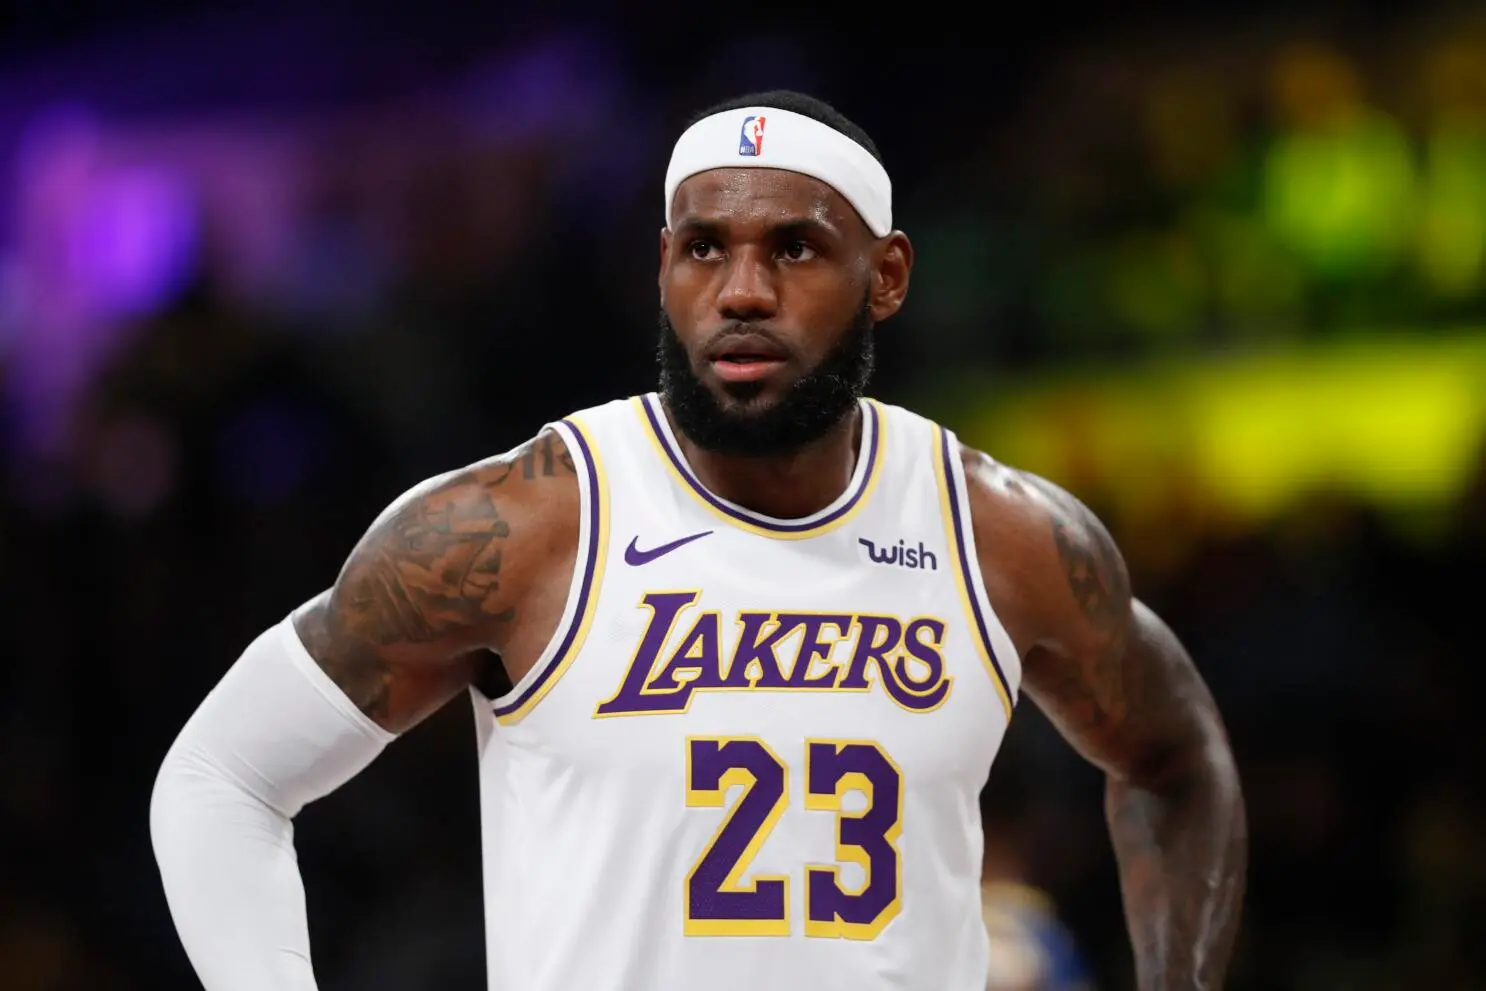 LeBron James a career 39K points during Jazz vs Lakers game to become the first player to achieve that feat